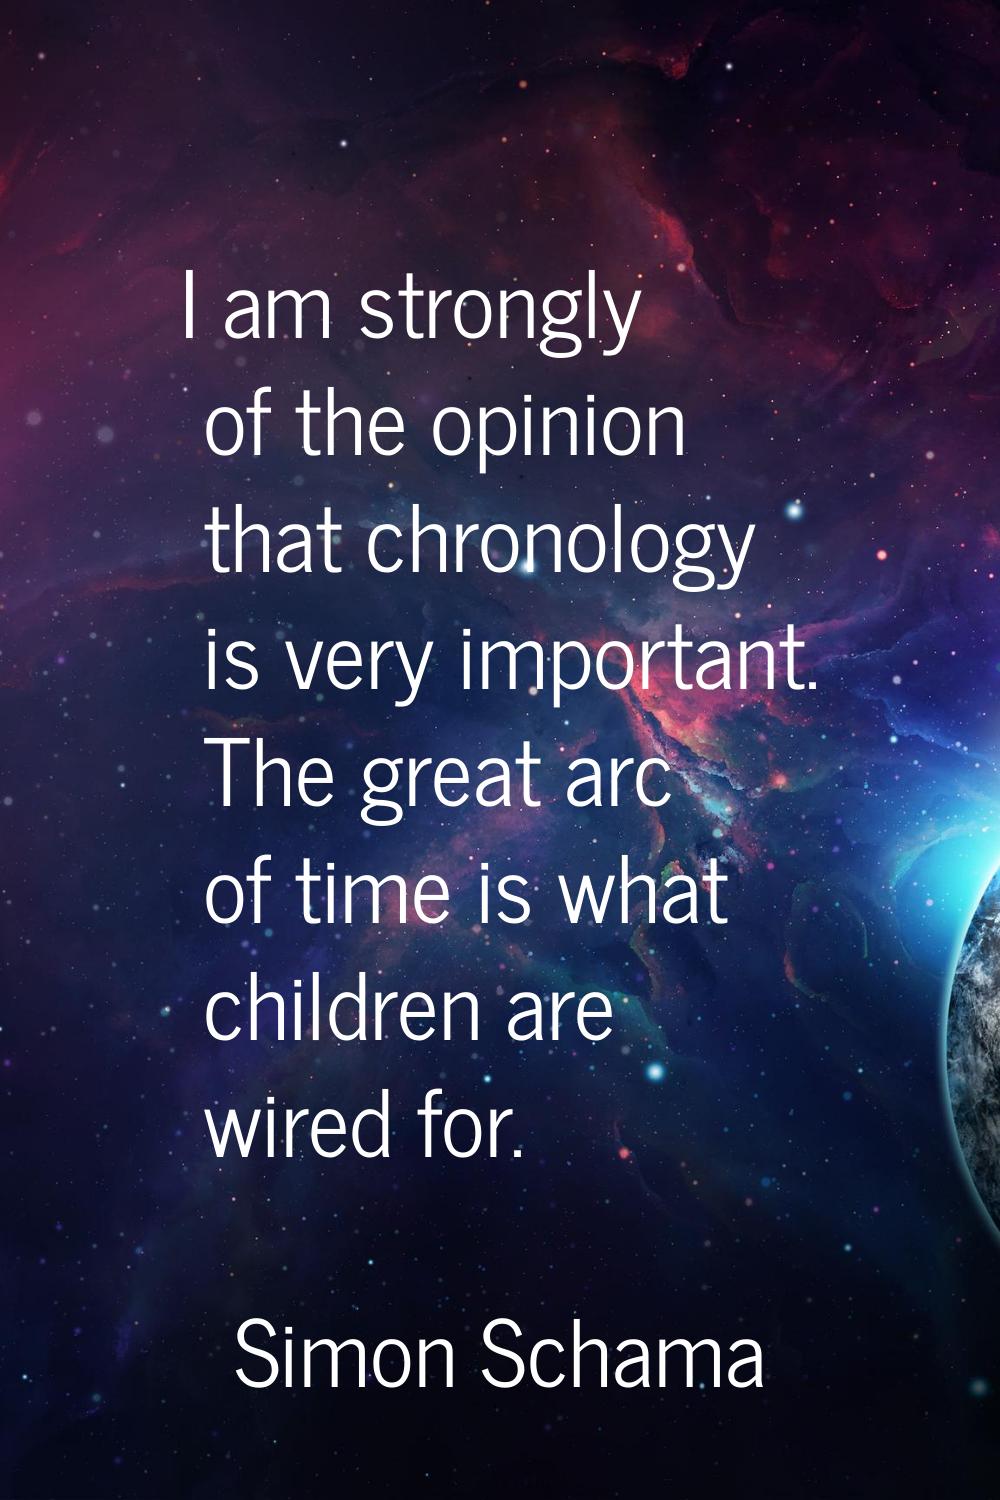 I am strongly of the opinion that chronology is very important. The great arc of time is what child